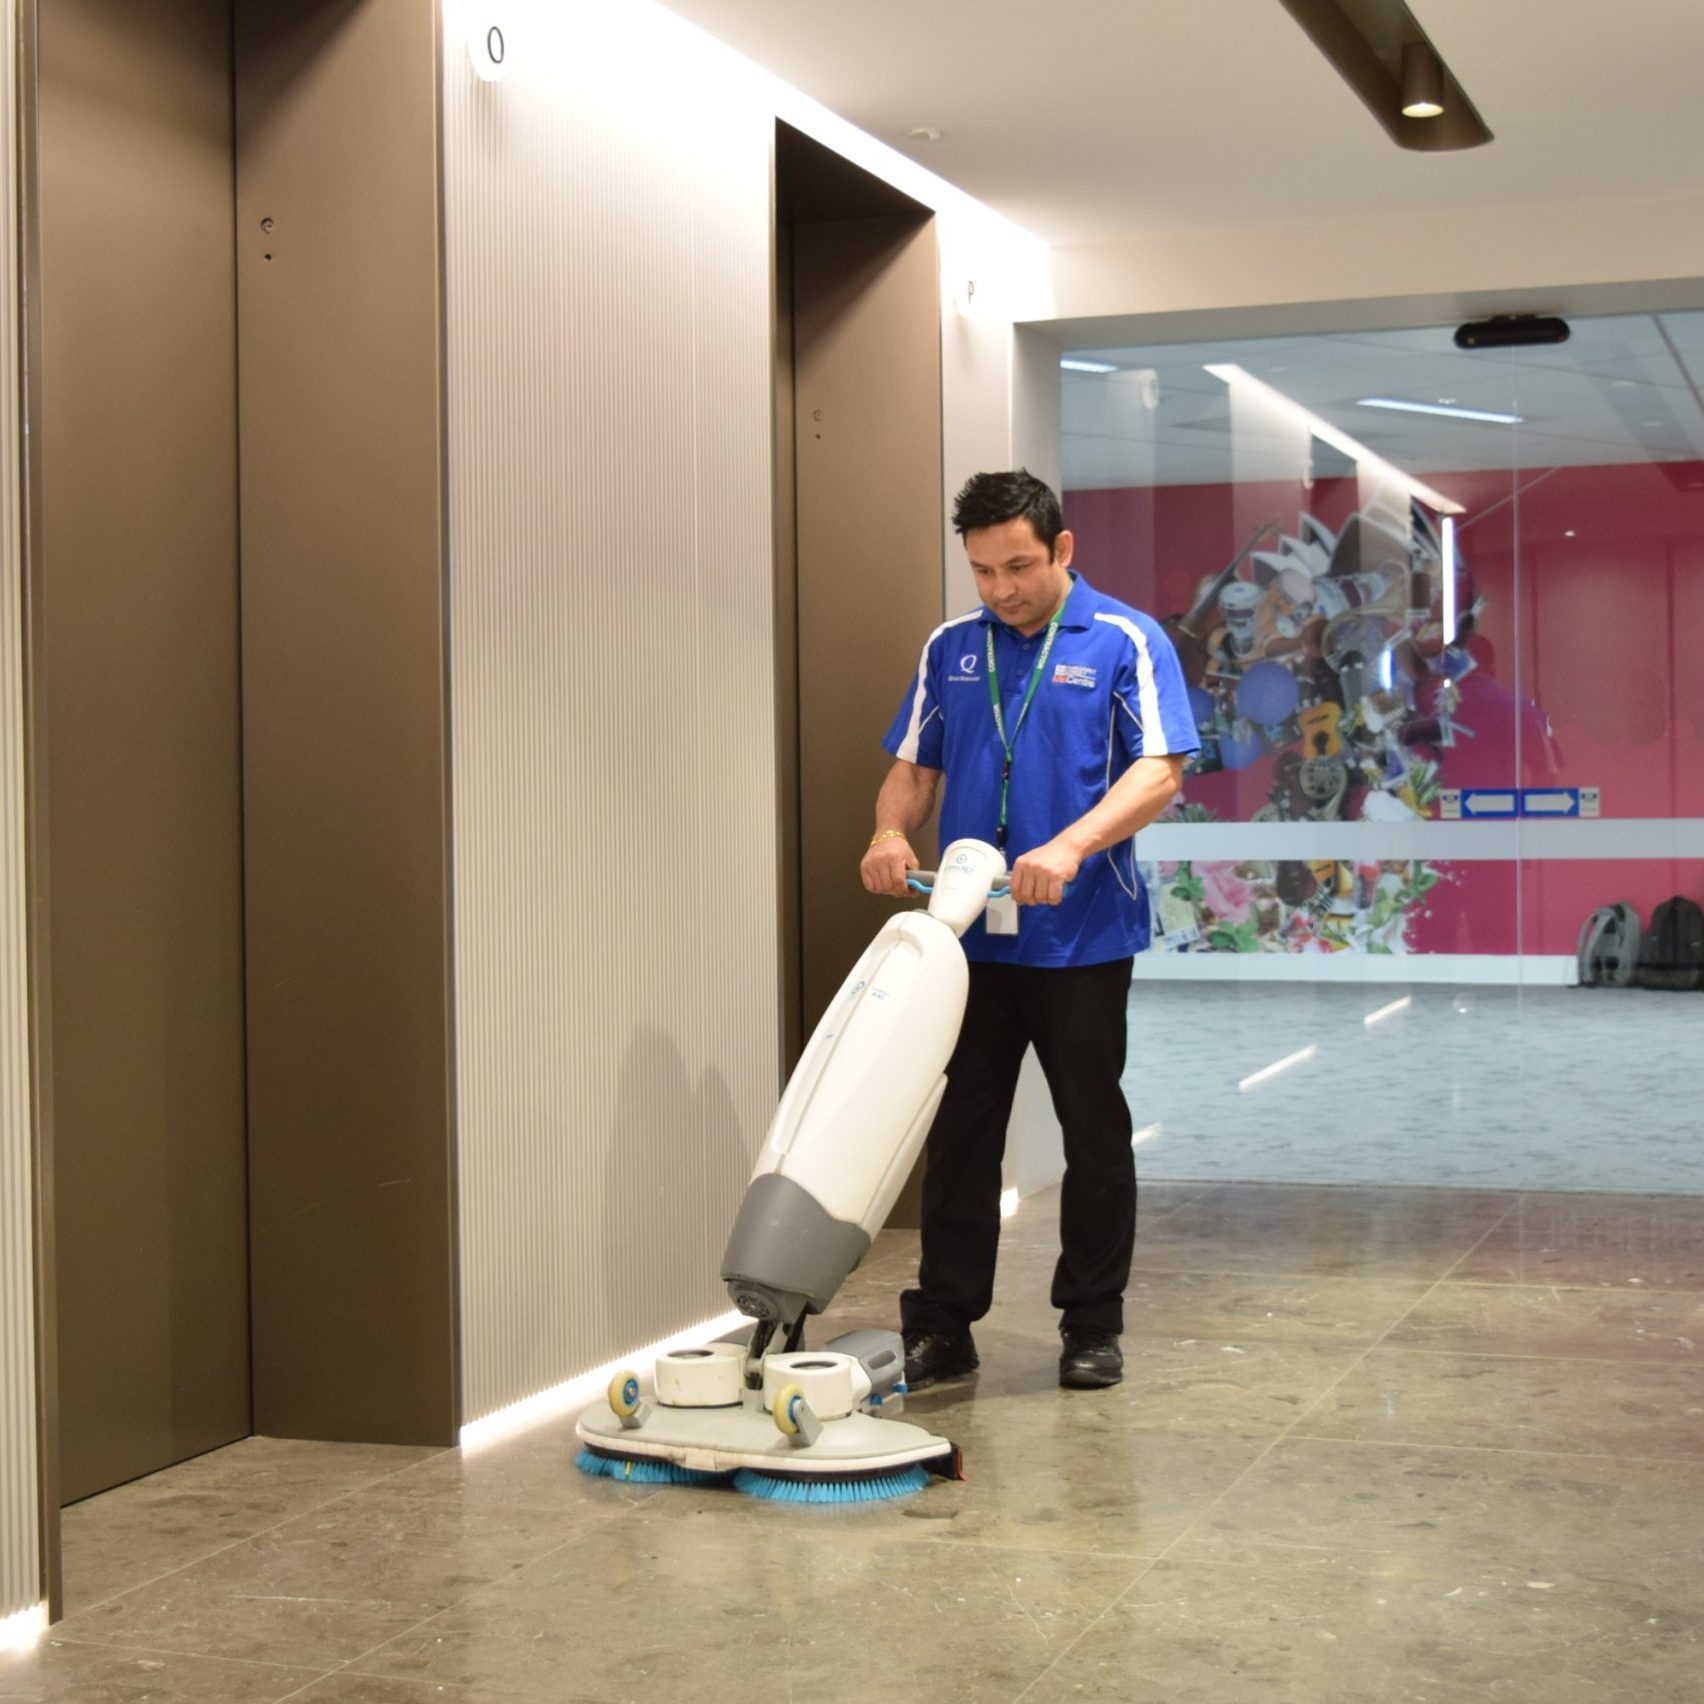 Government Building Cleaning Services Australia